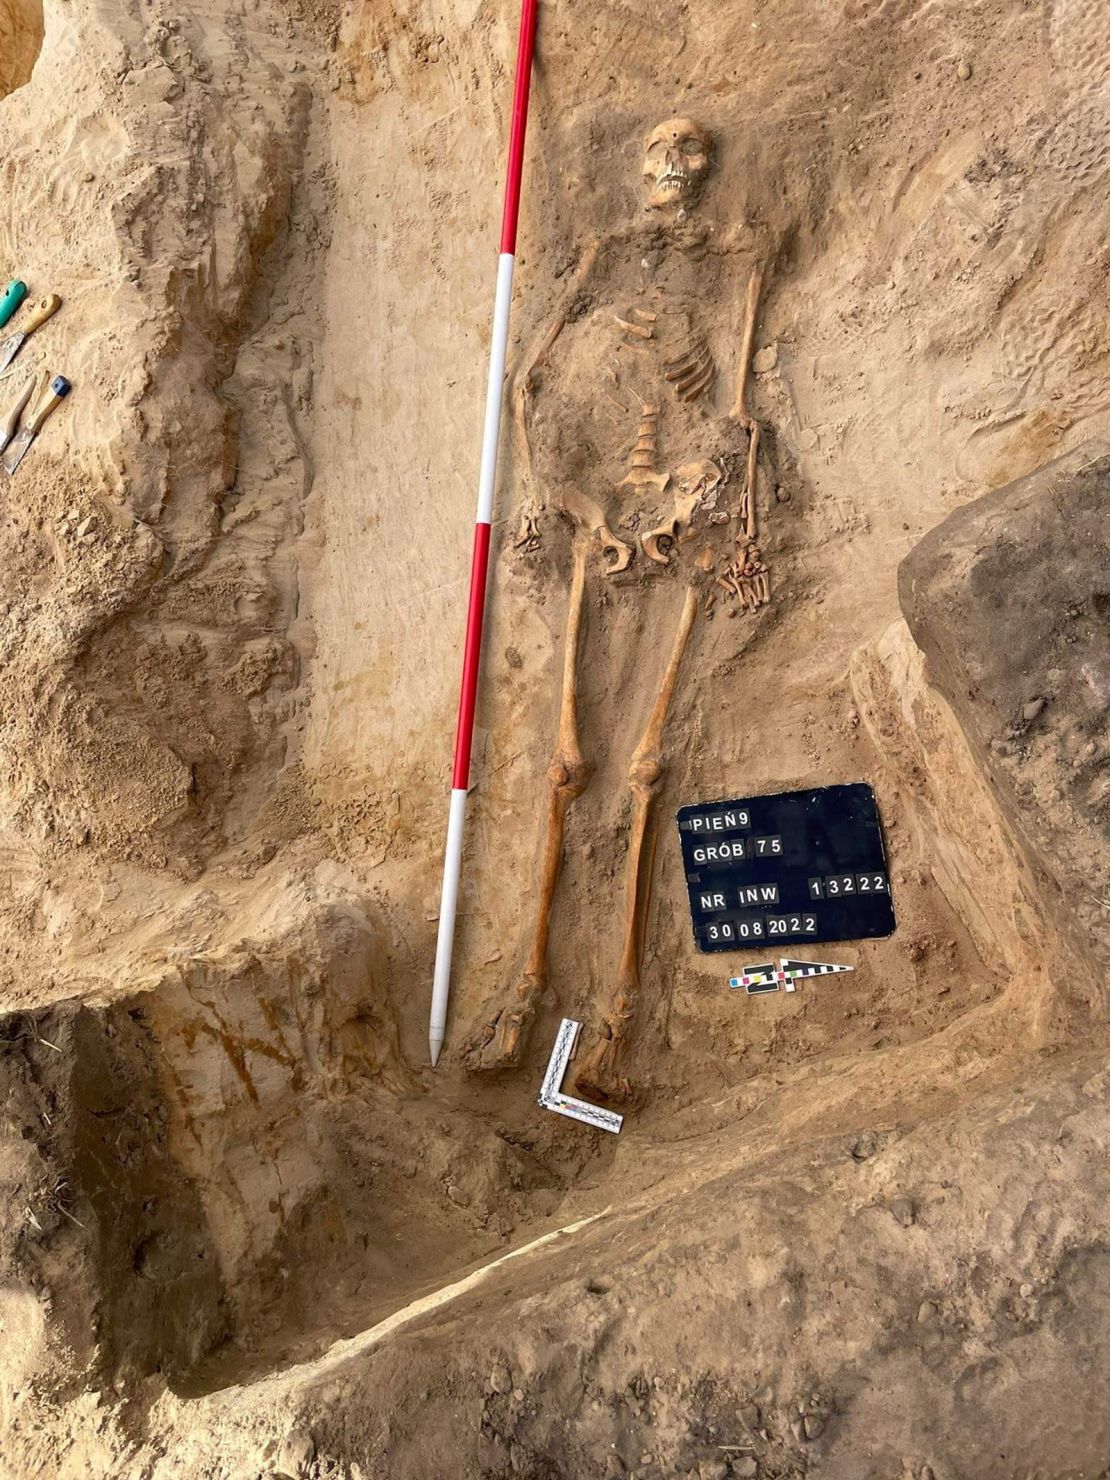 The skeleton of a young woman buried with a padlock on her foot and an iron sickle across her neck, apparently as a way of preventing her from rising from the dead, is seen in Pien, Poland.